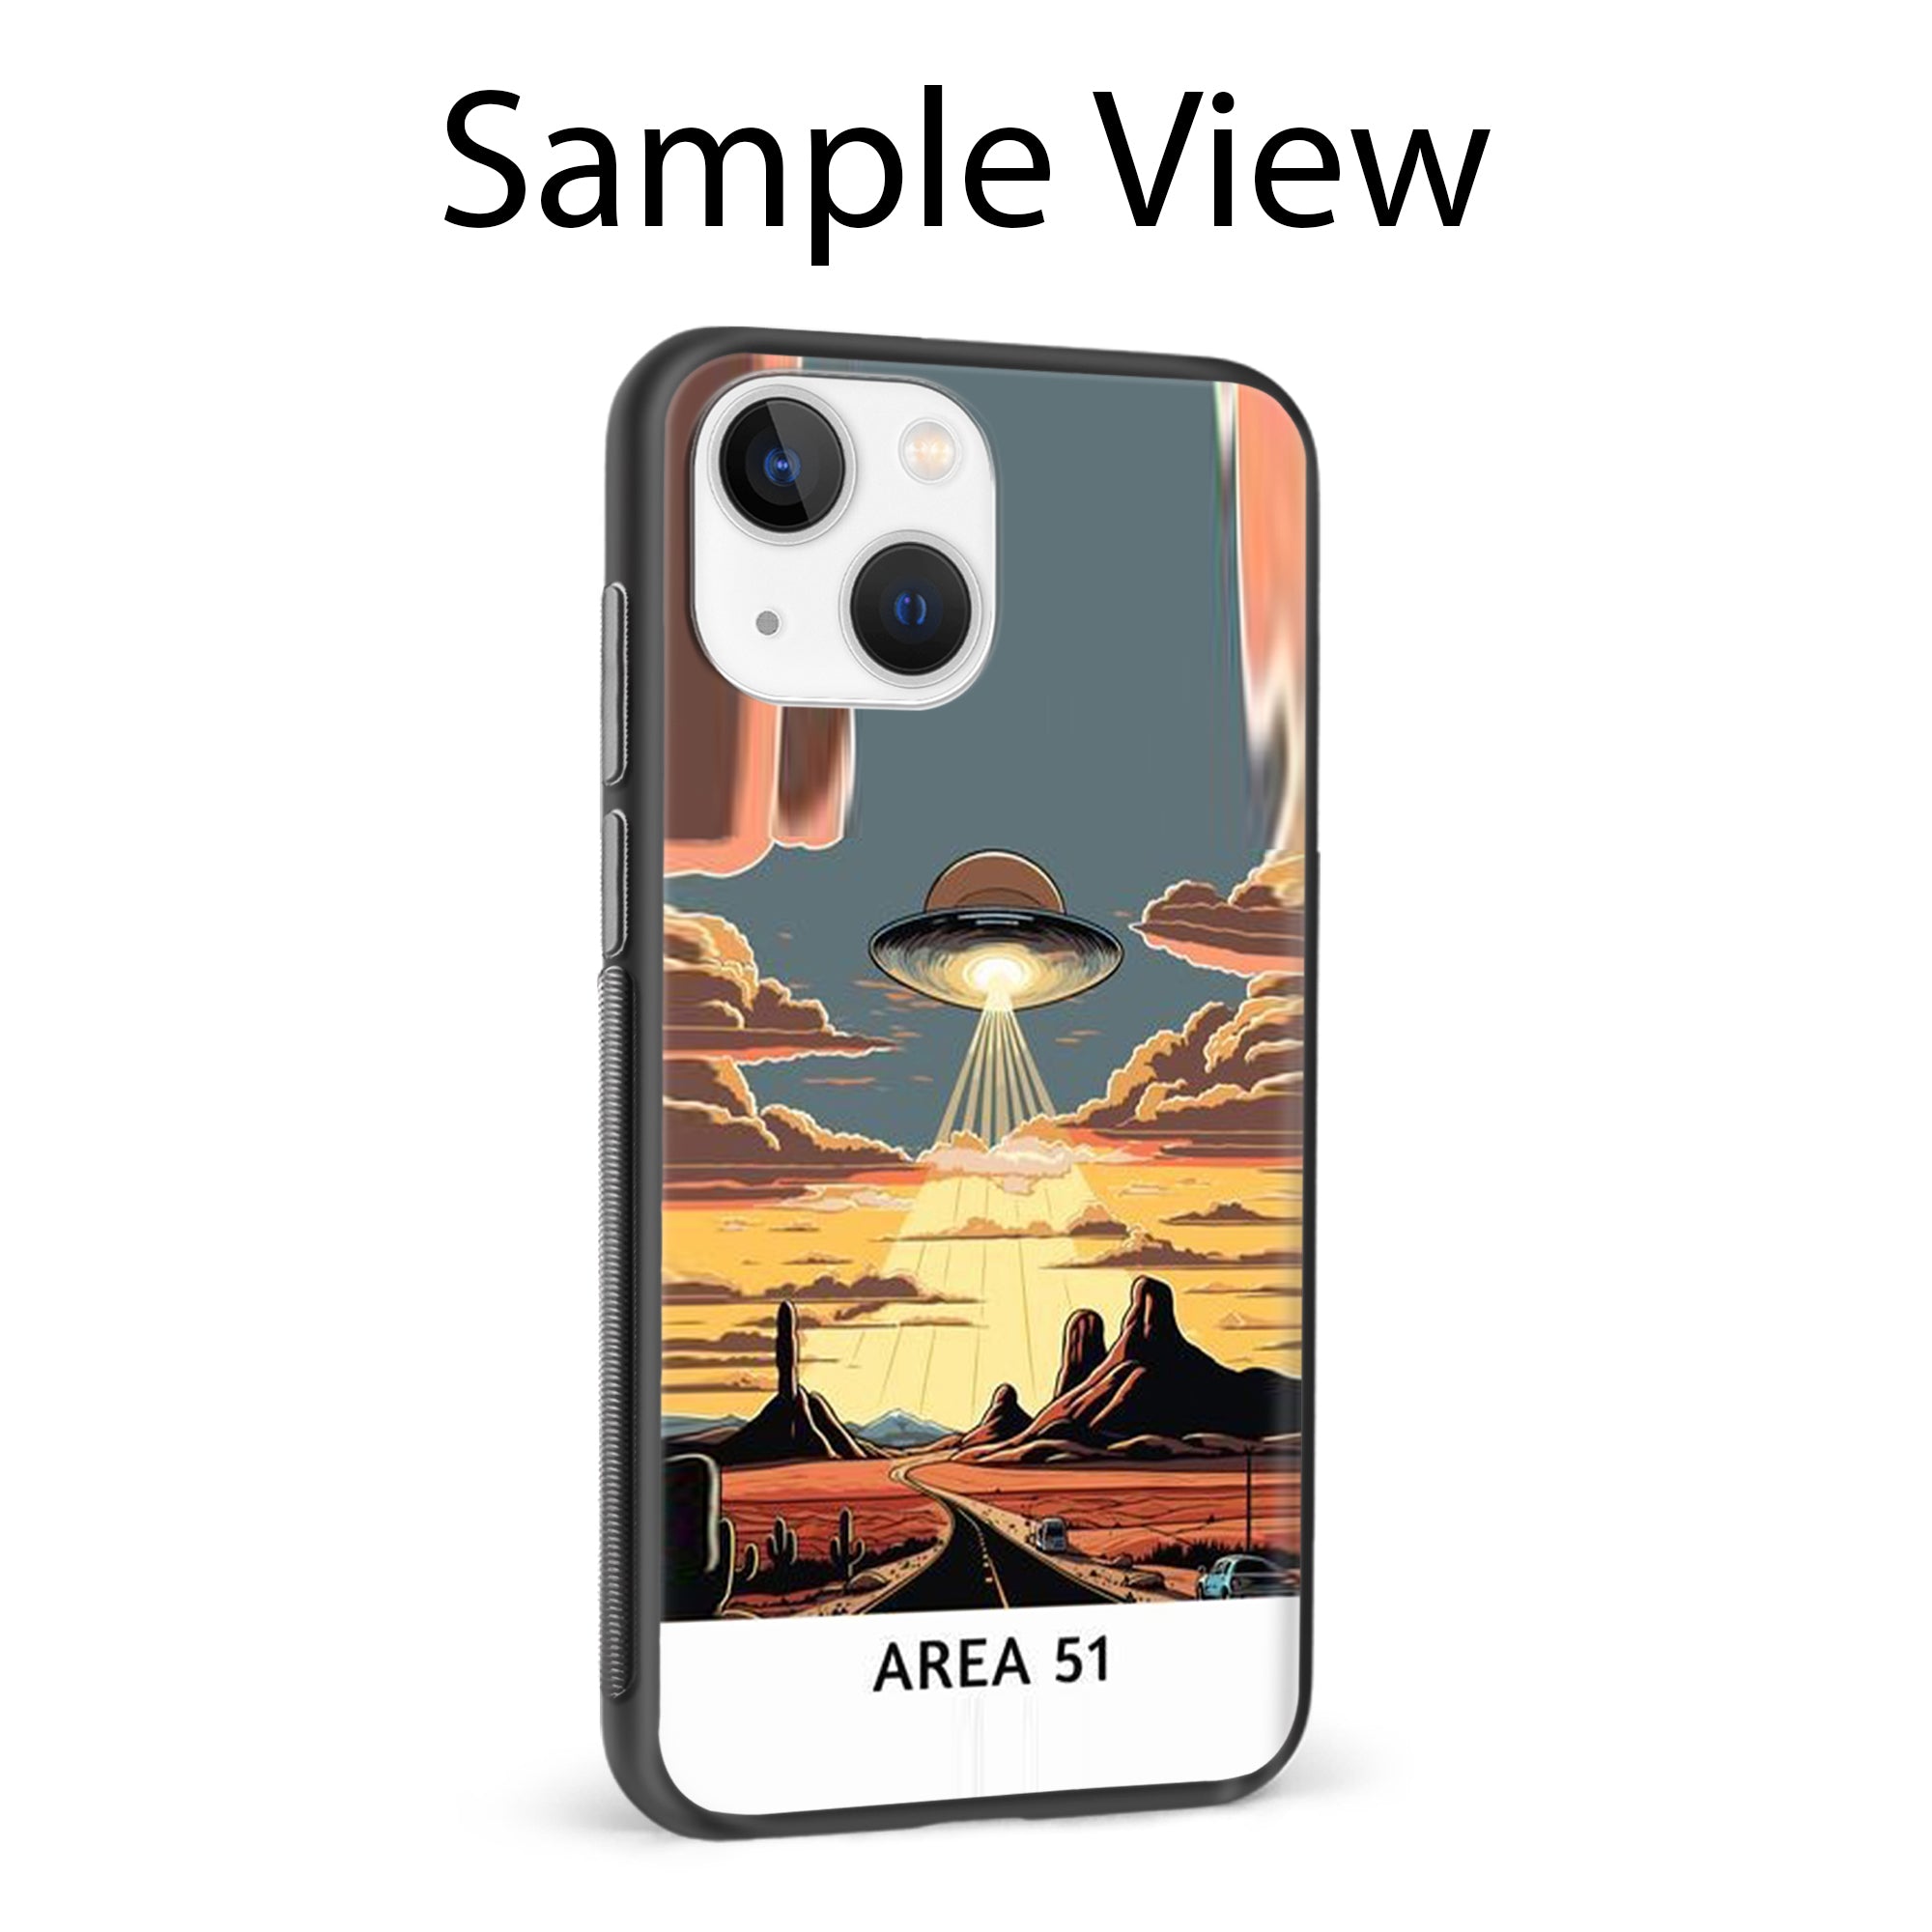 Buy Area 51 Glass/Metal Back Mobile Phone Case/Cover For iPhone 11 Online